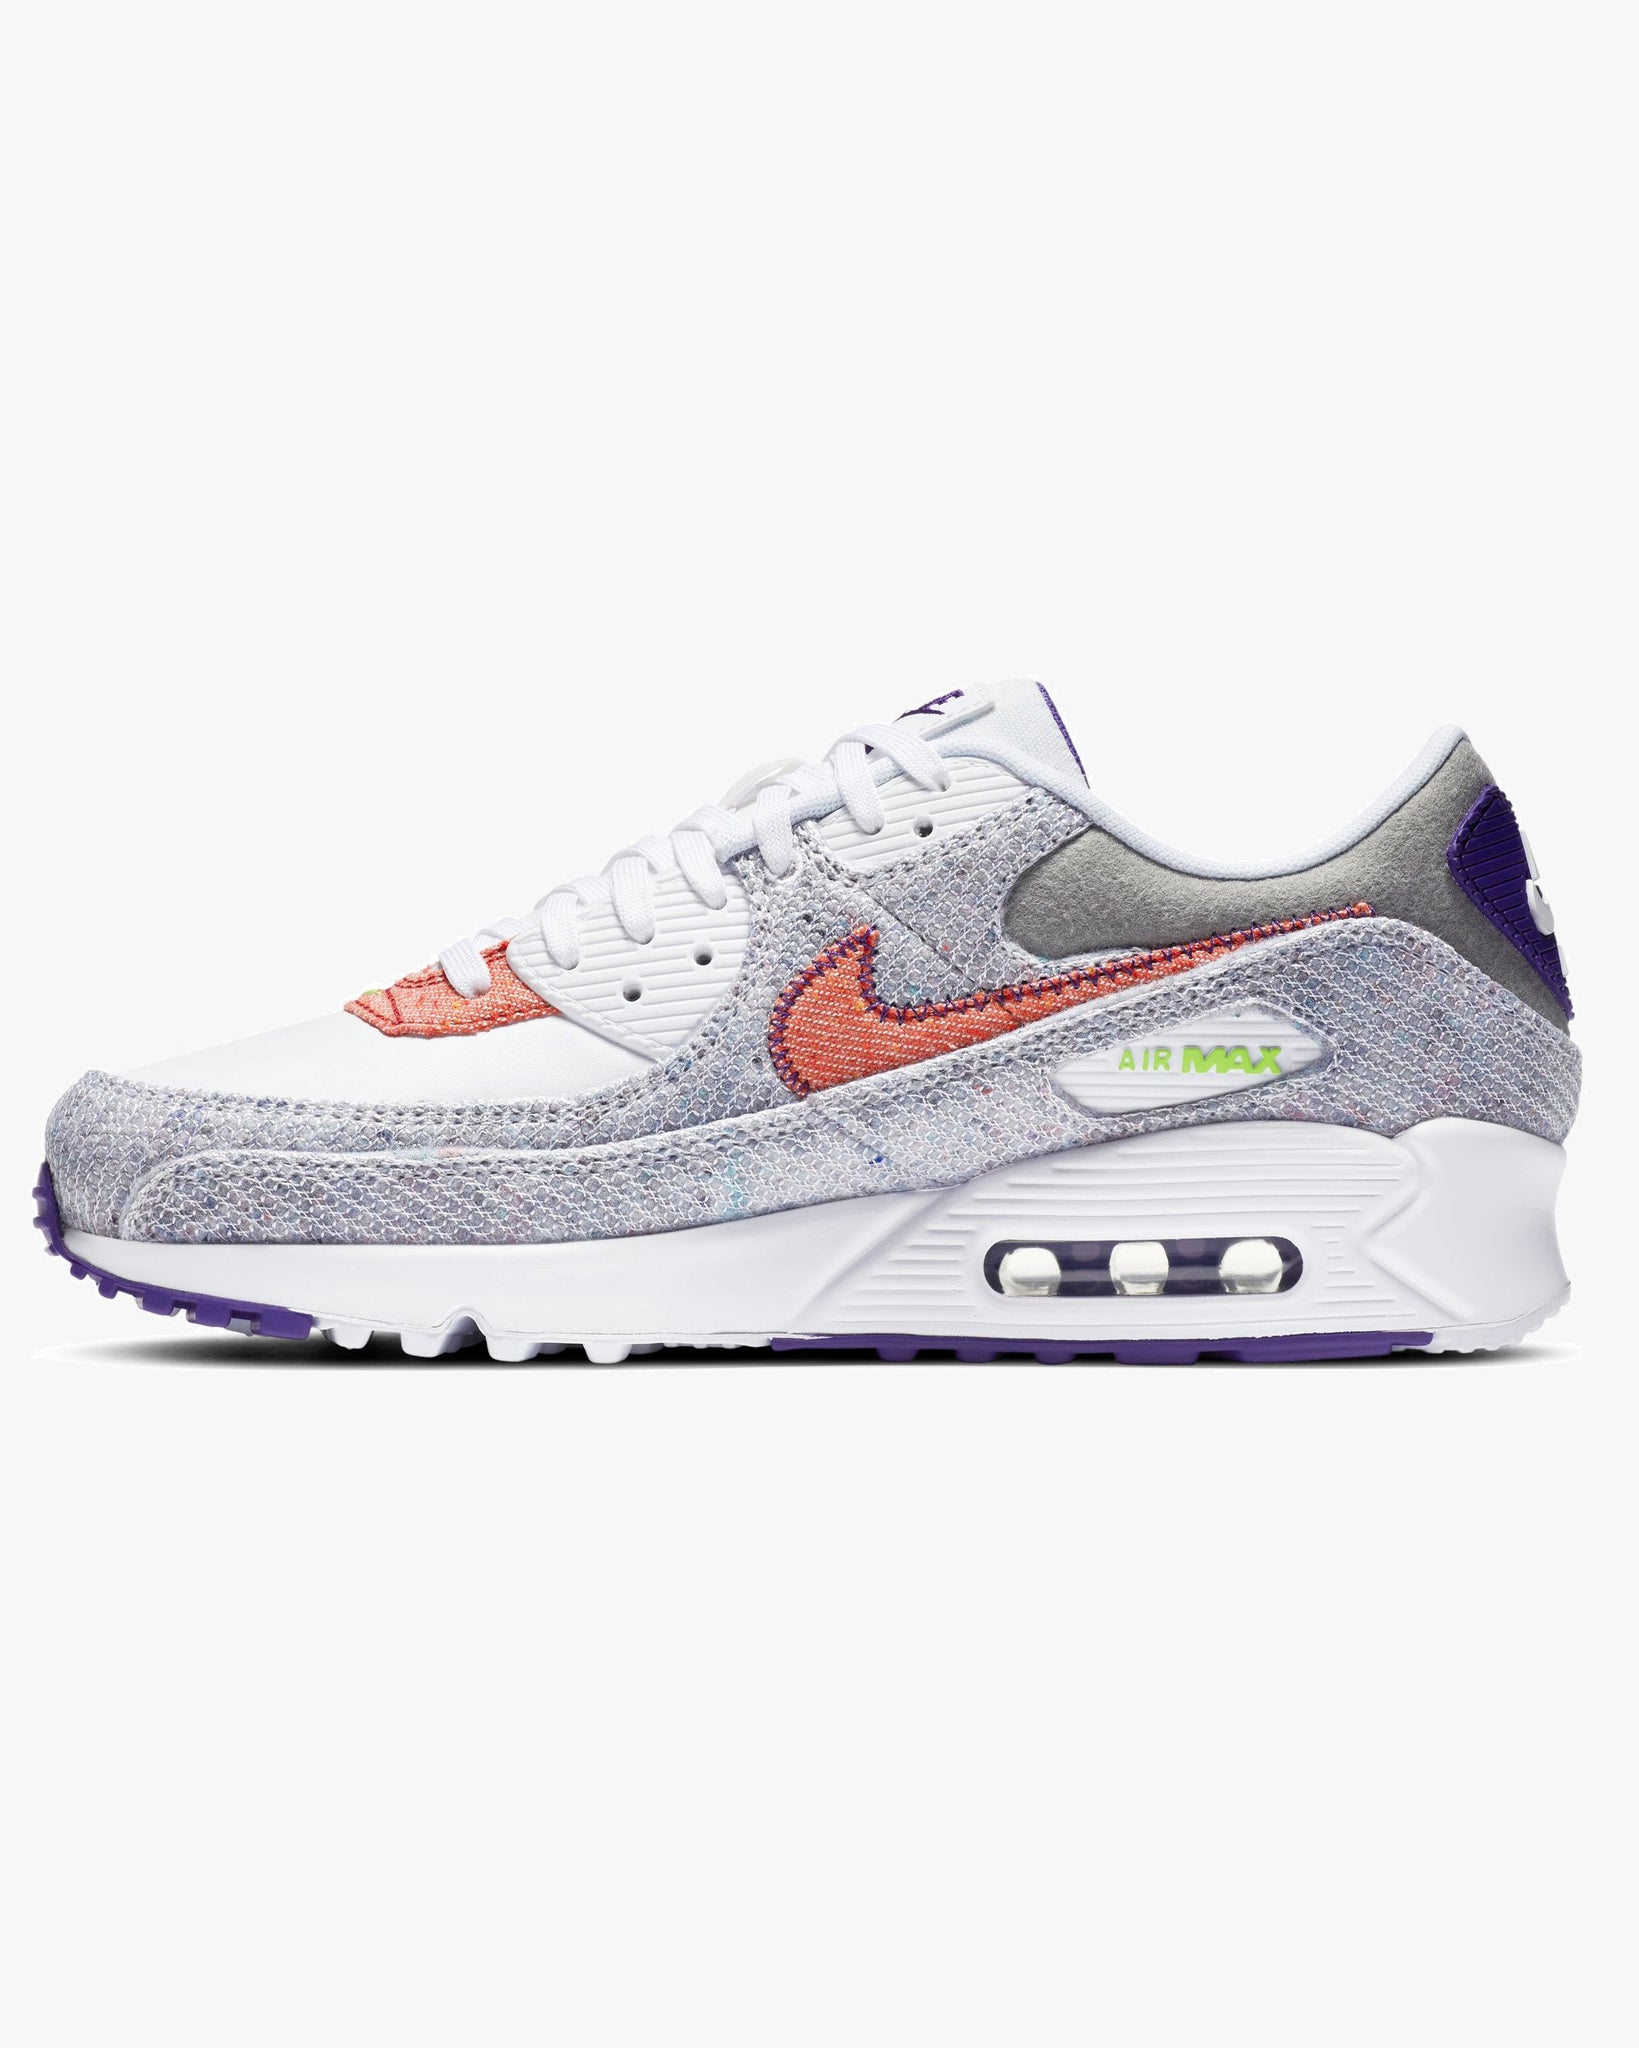 nike air max 90 white and green trainers